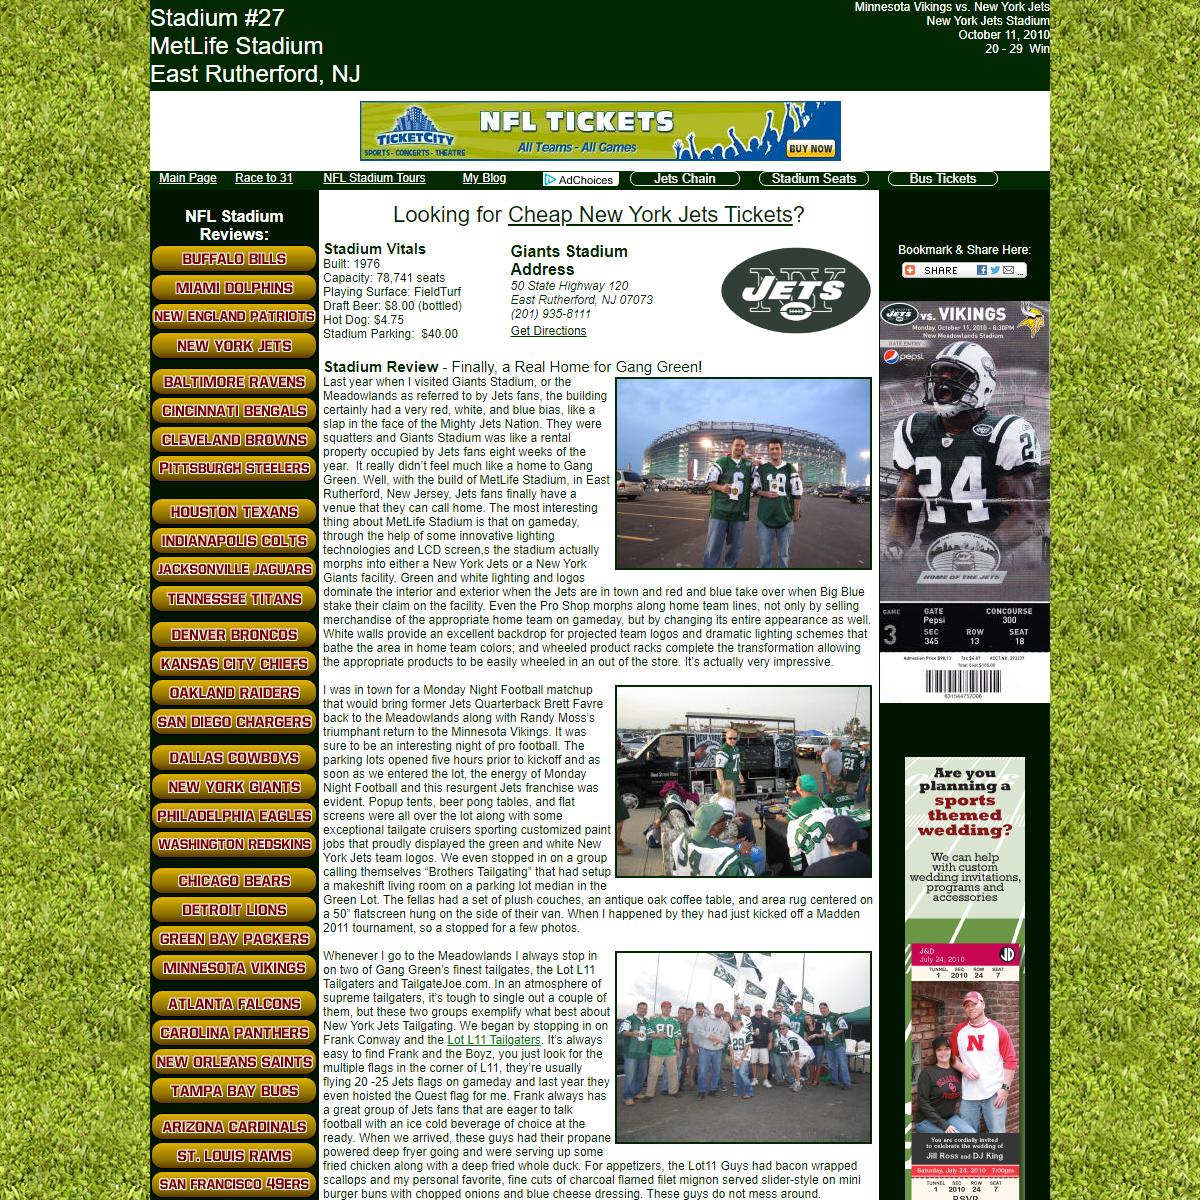 A complete backup of http://questfor31.com/Meadowlands-NY-Jets.htm